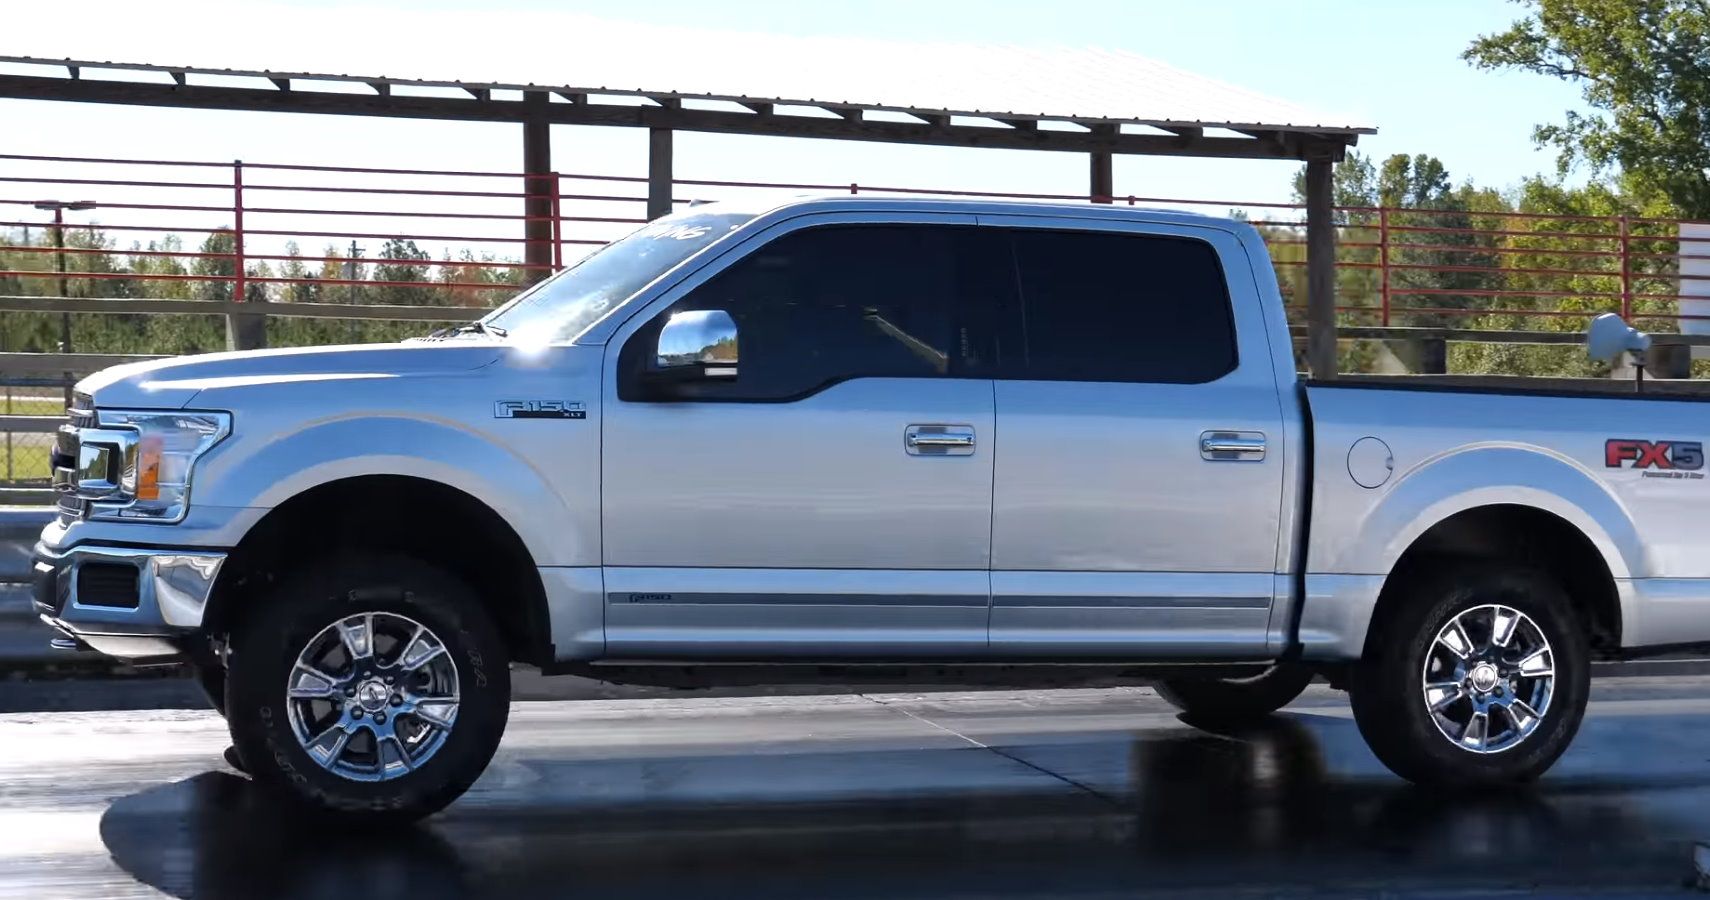 South Carolina Tuner Gives Sleeper Ford F150 Pickup 720 HP For A Low Price